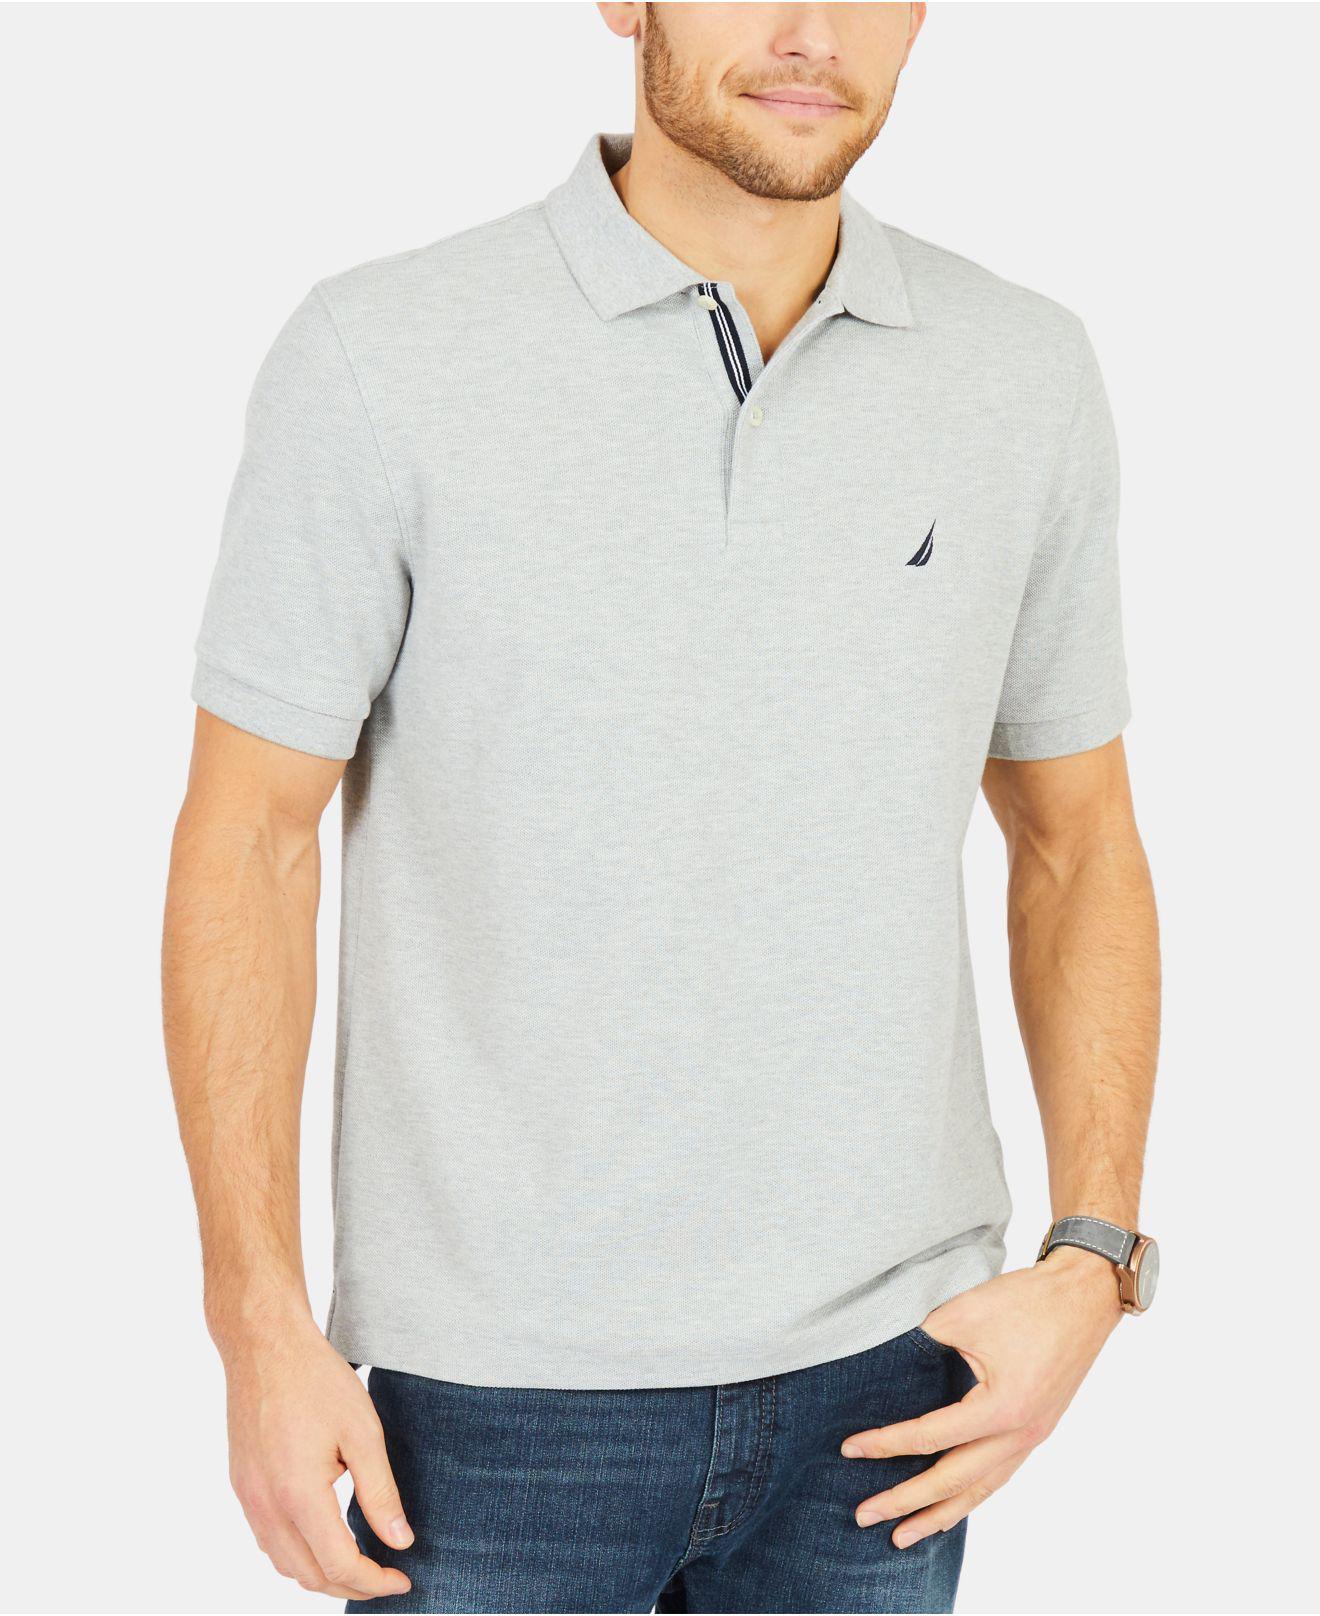 Lyst - Nautica Classic Fit Performance Deck Polo Shirt in Gray for Men ...